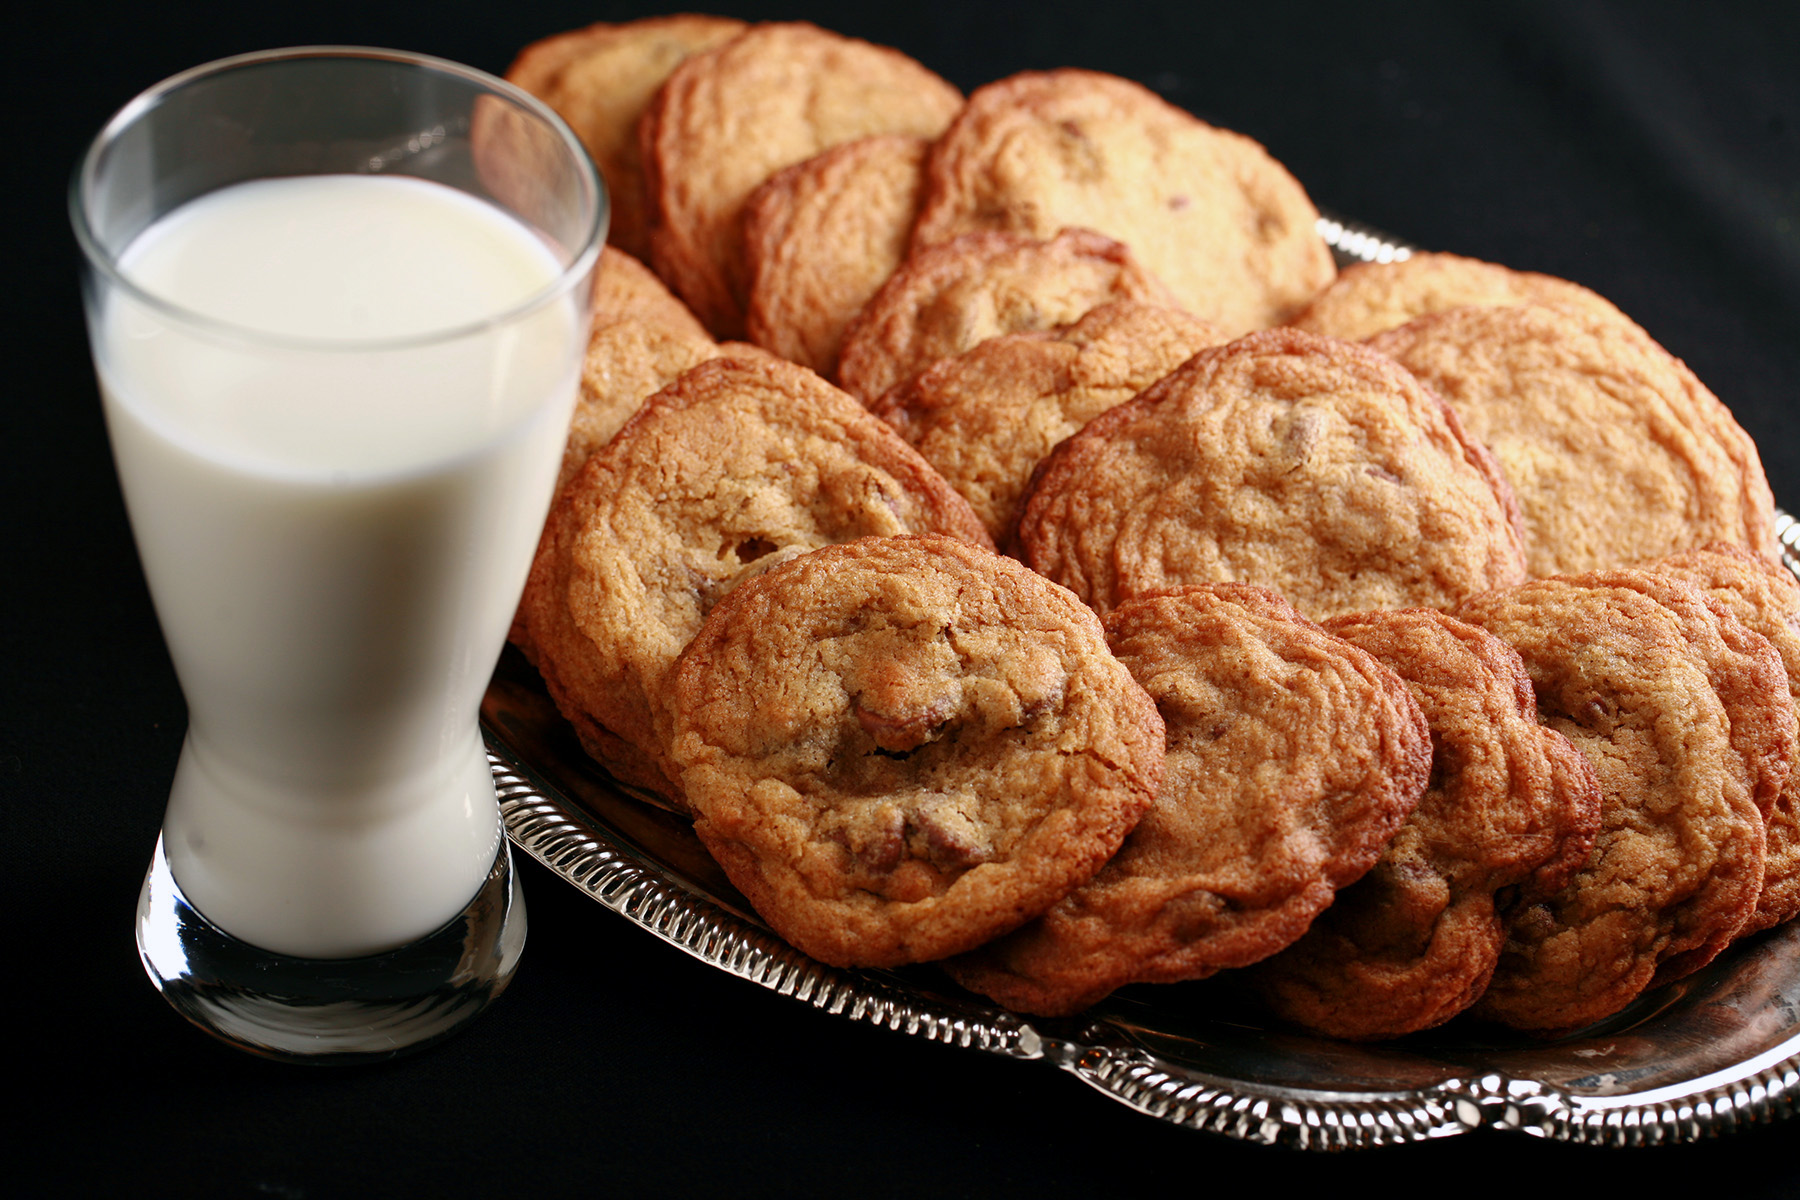 A plate of chewy gluten free chocolate chip cookies.